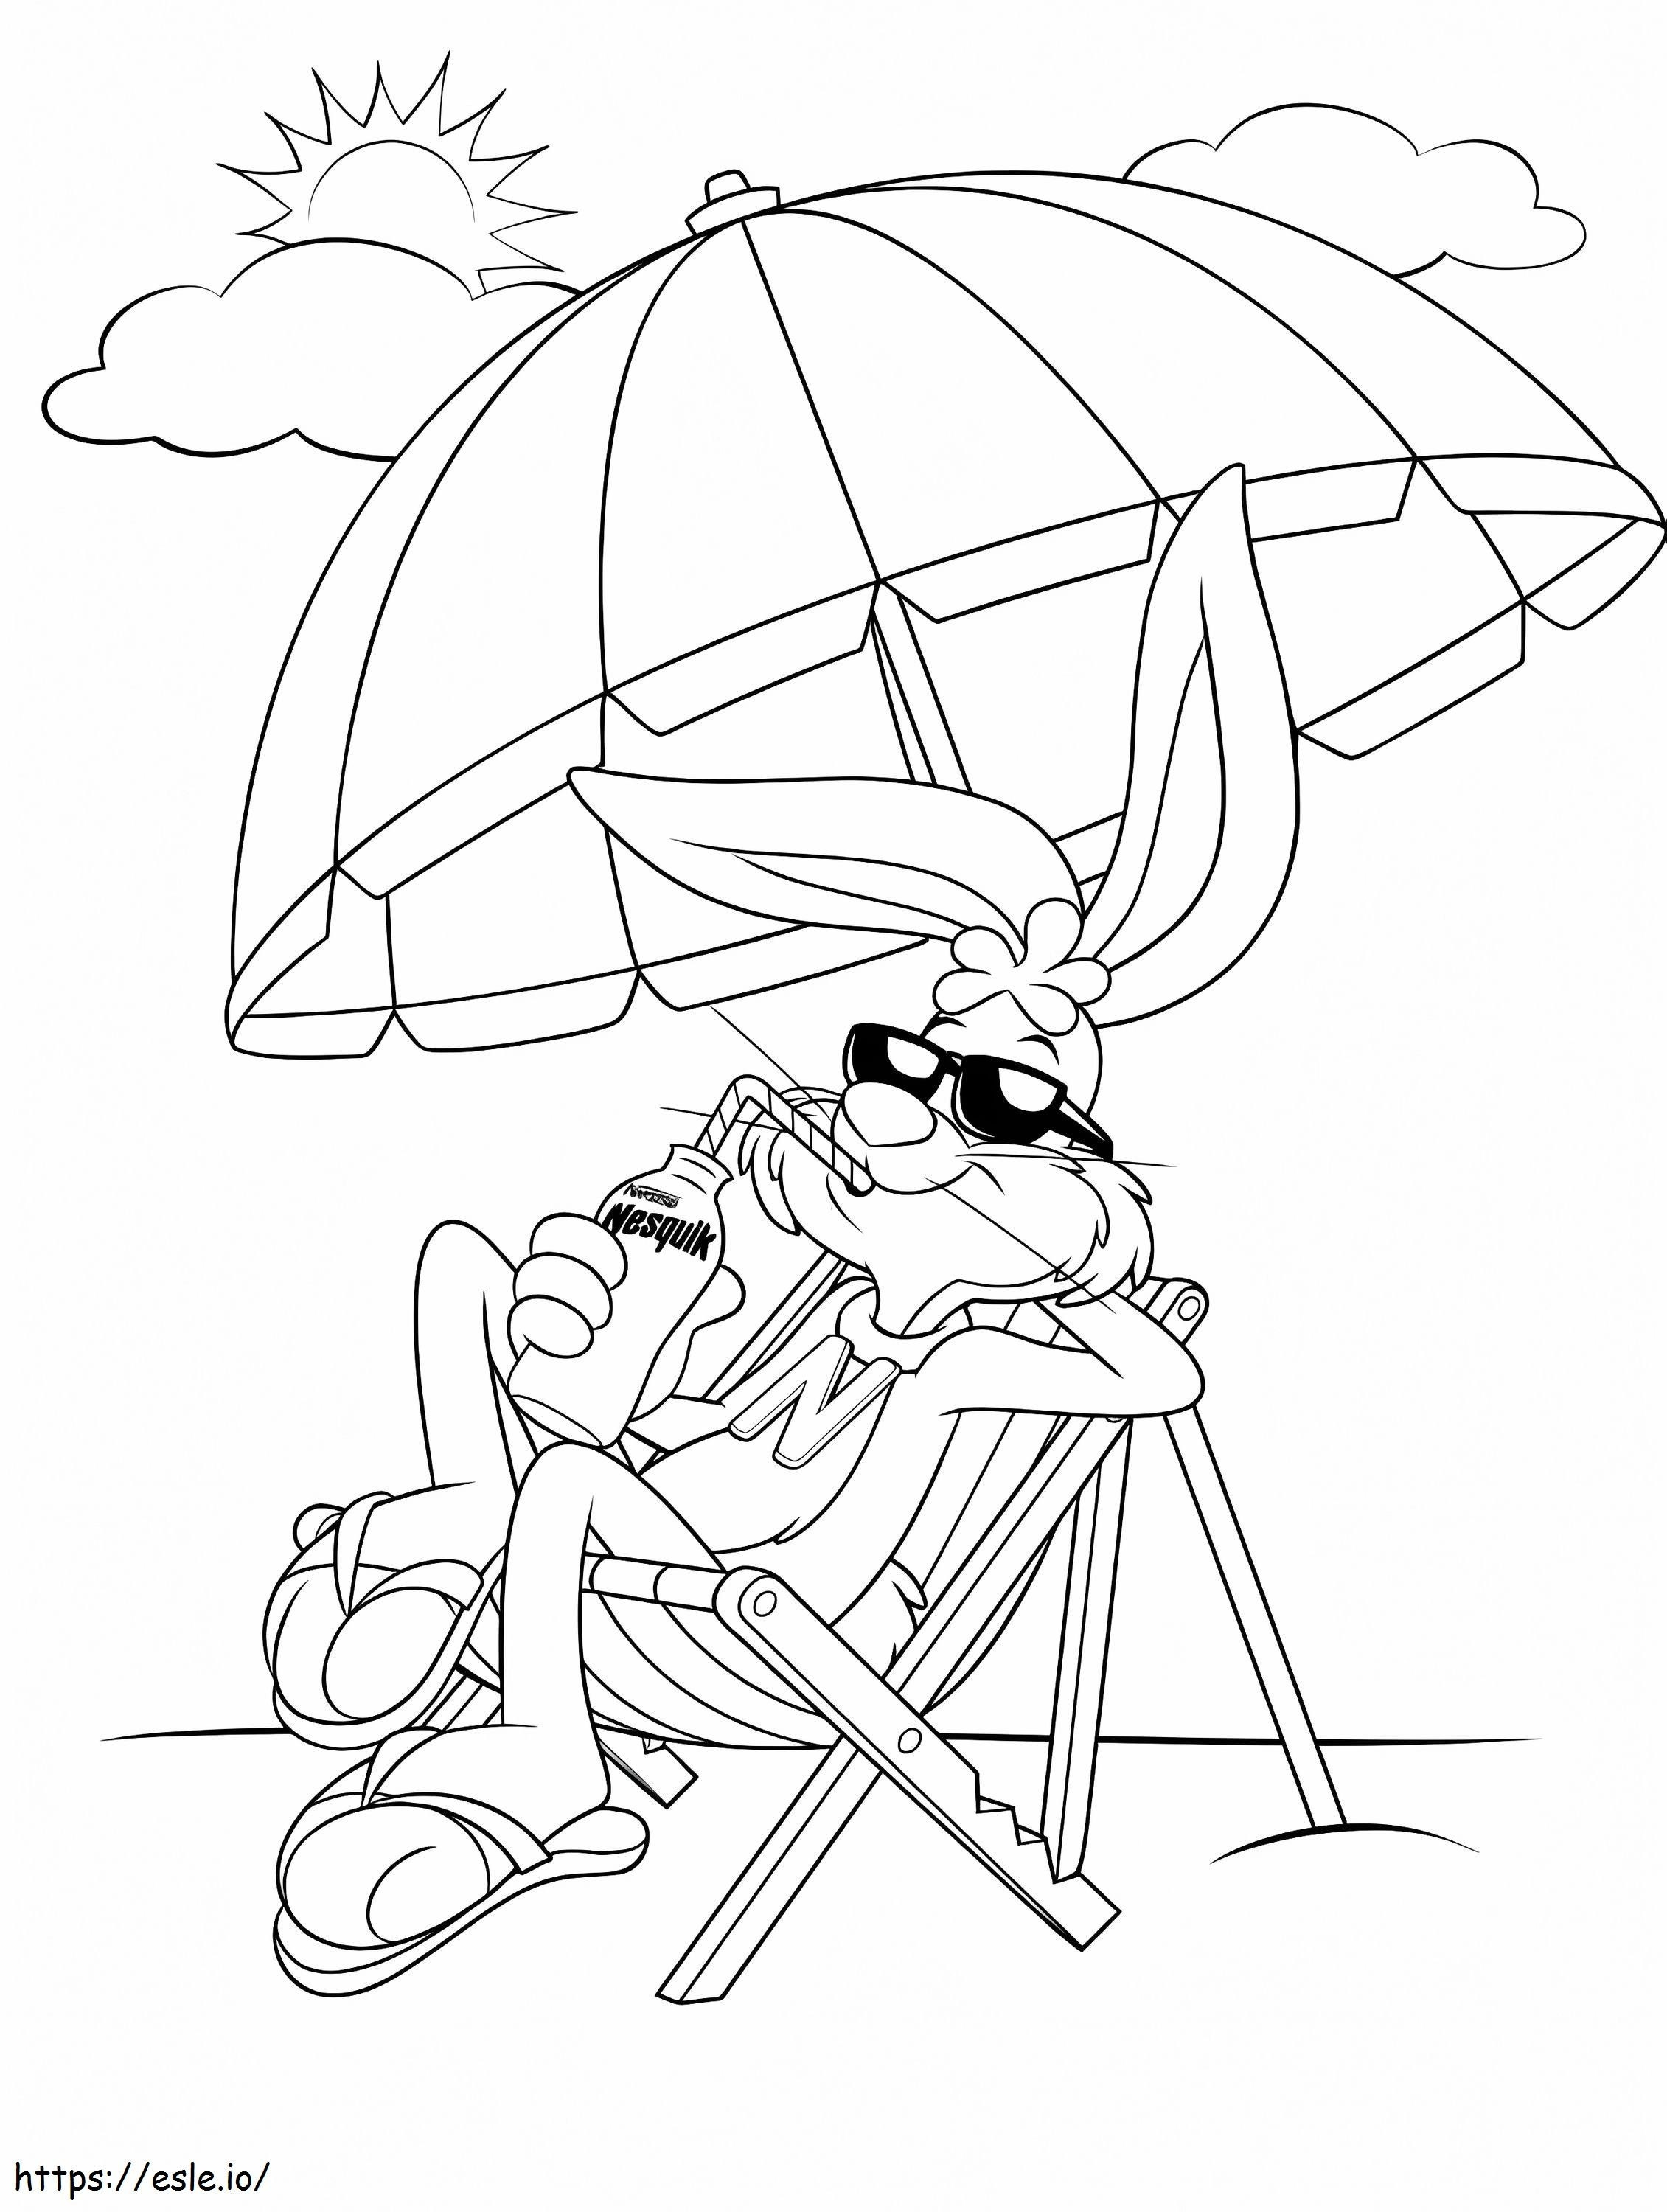 Summer Nesquik coloring page